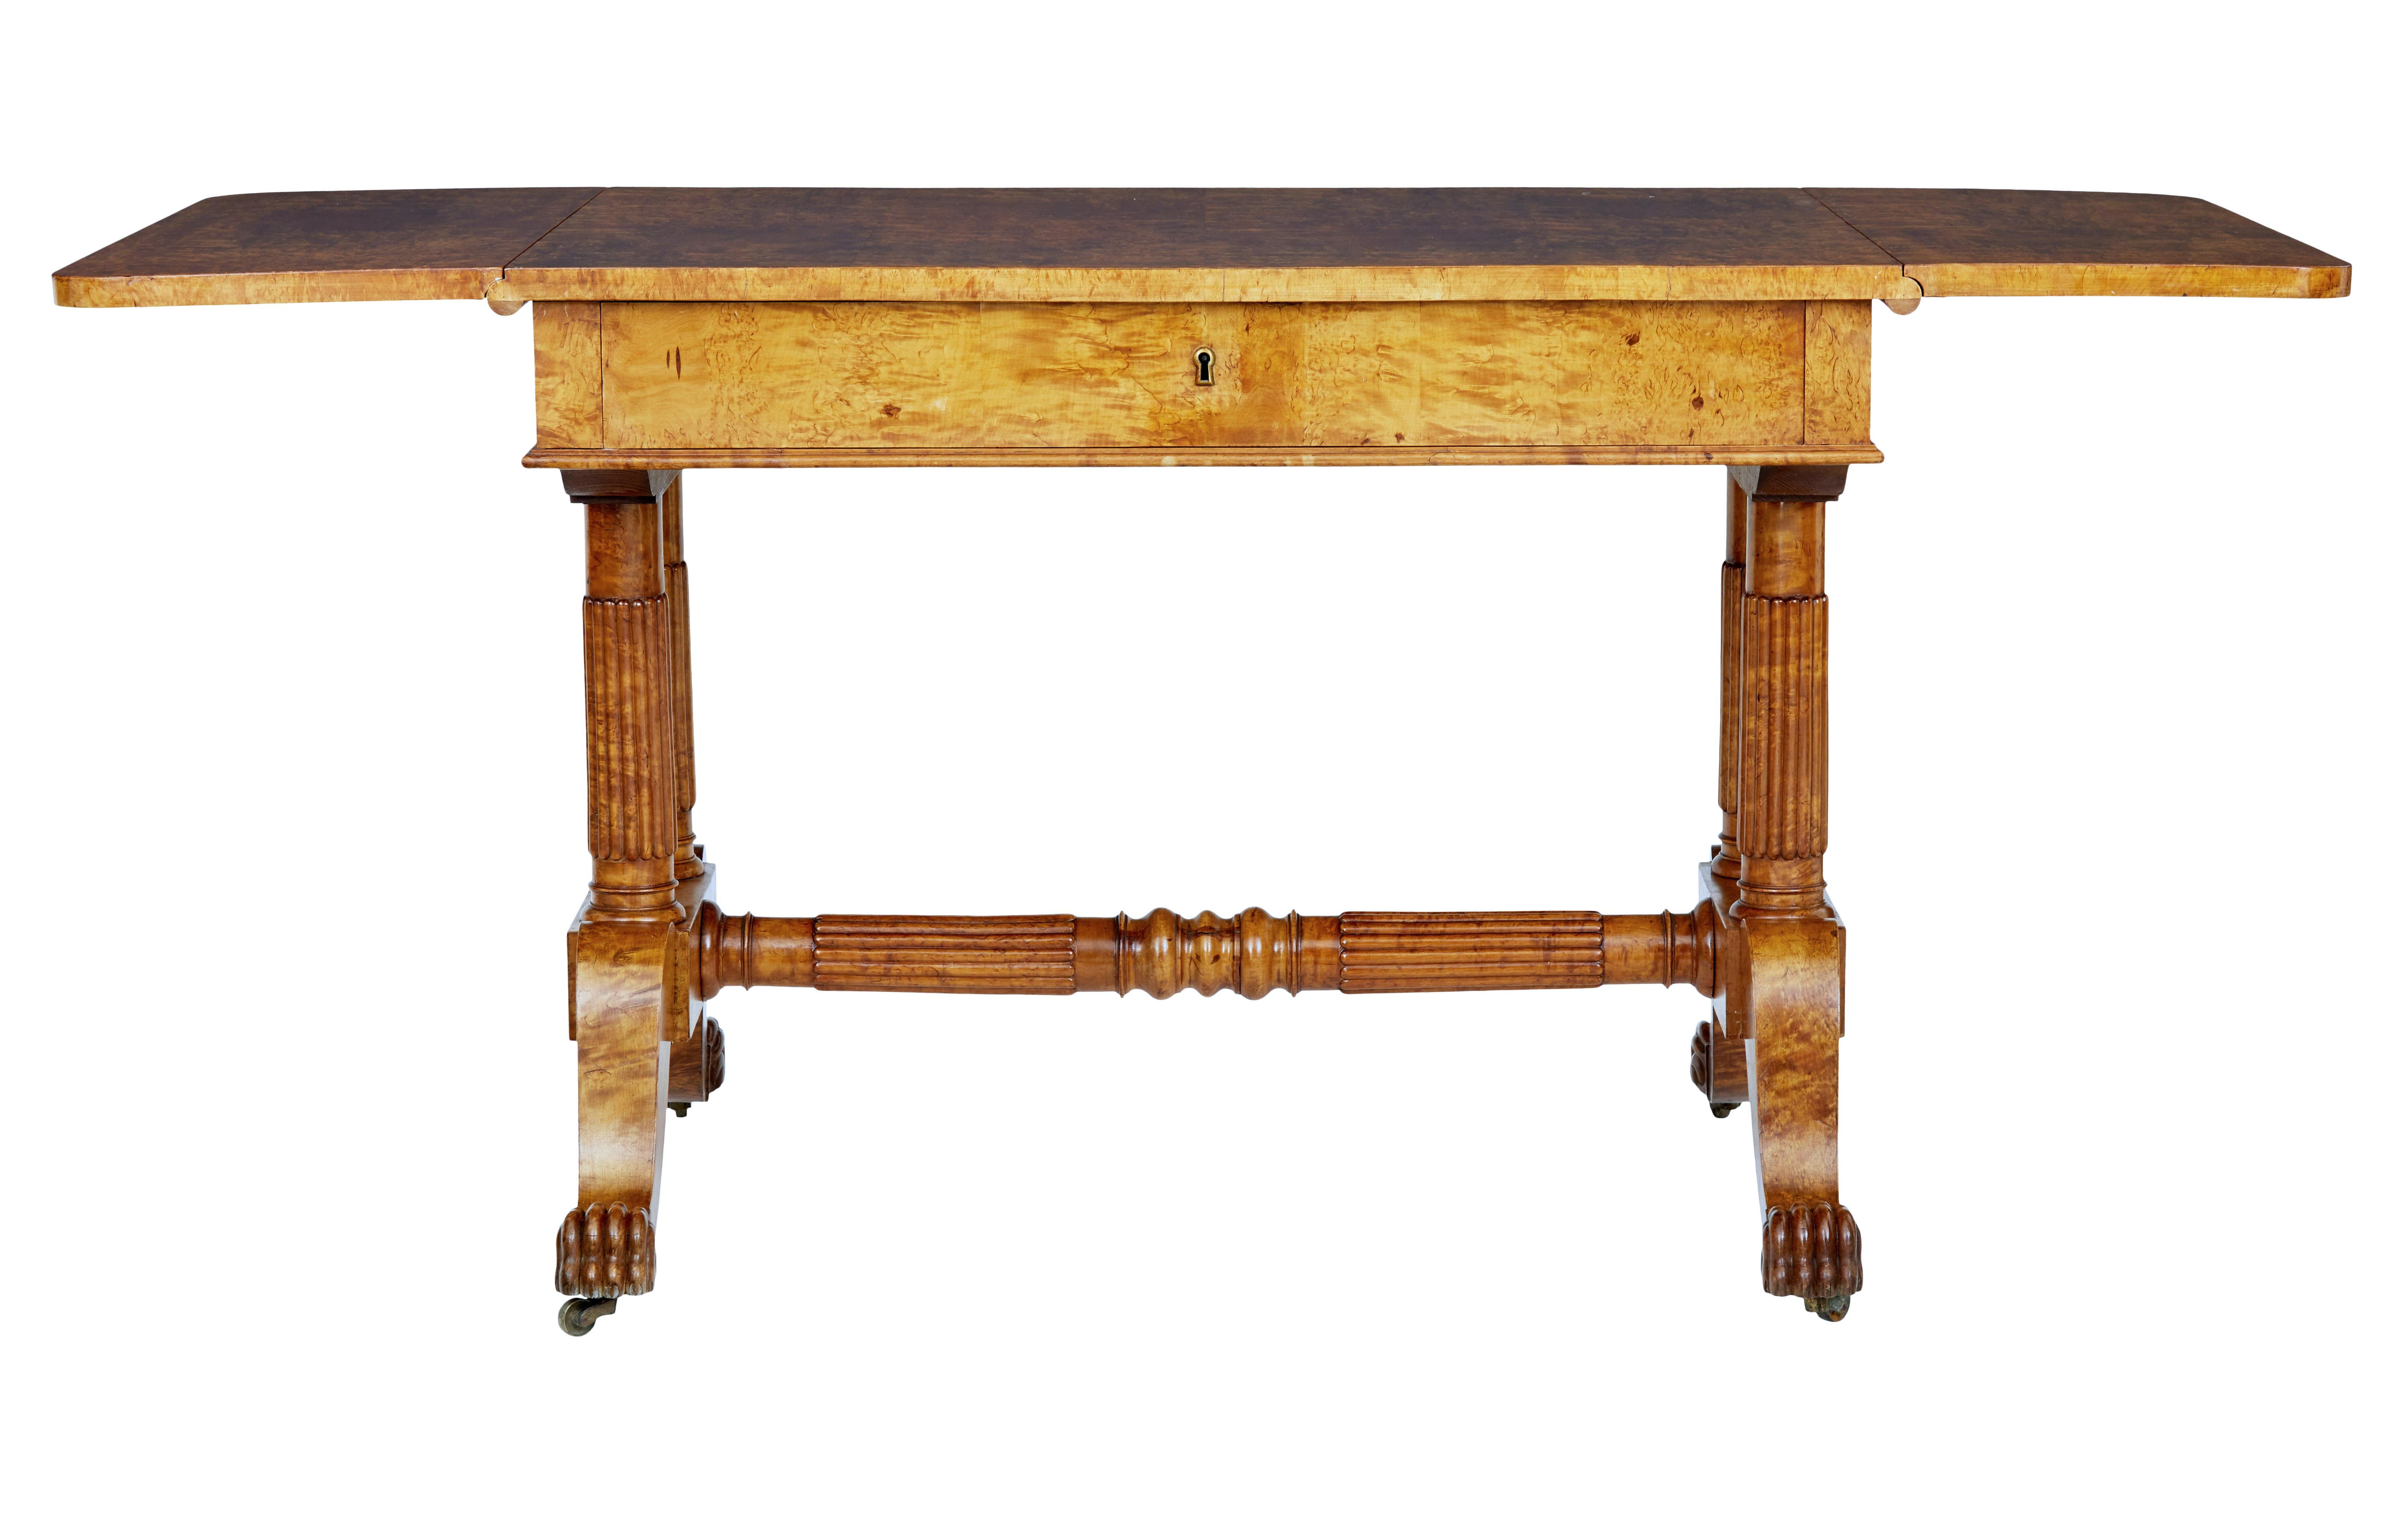 Superb quality Biedermeier period sofa table circa 1825.

Beautifully made from burr birch, giving it strong grains and colour. Drop down flaps provide a overall length of just over 63 inches.

Single deep drawer below the top surface. Standing